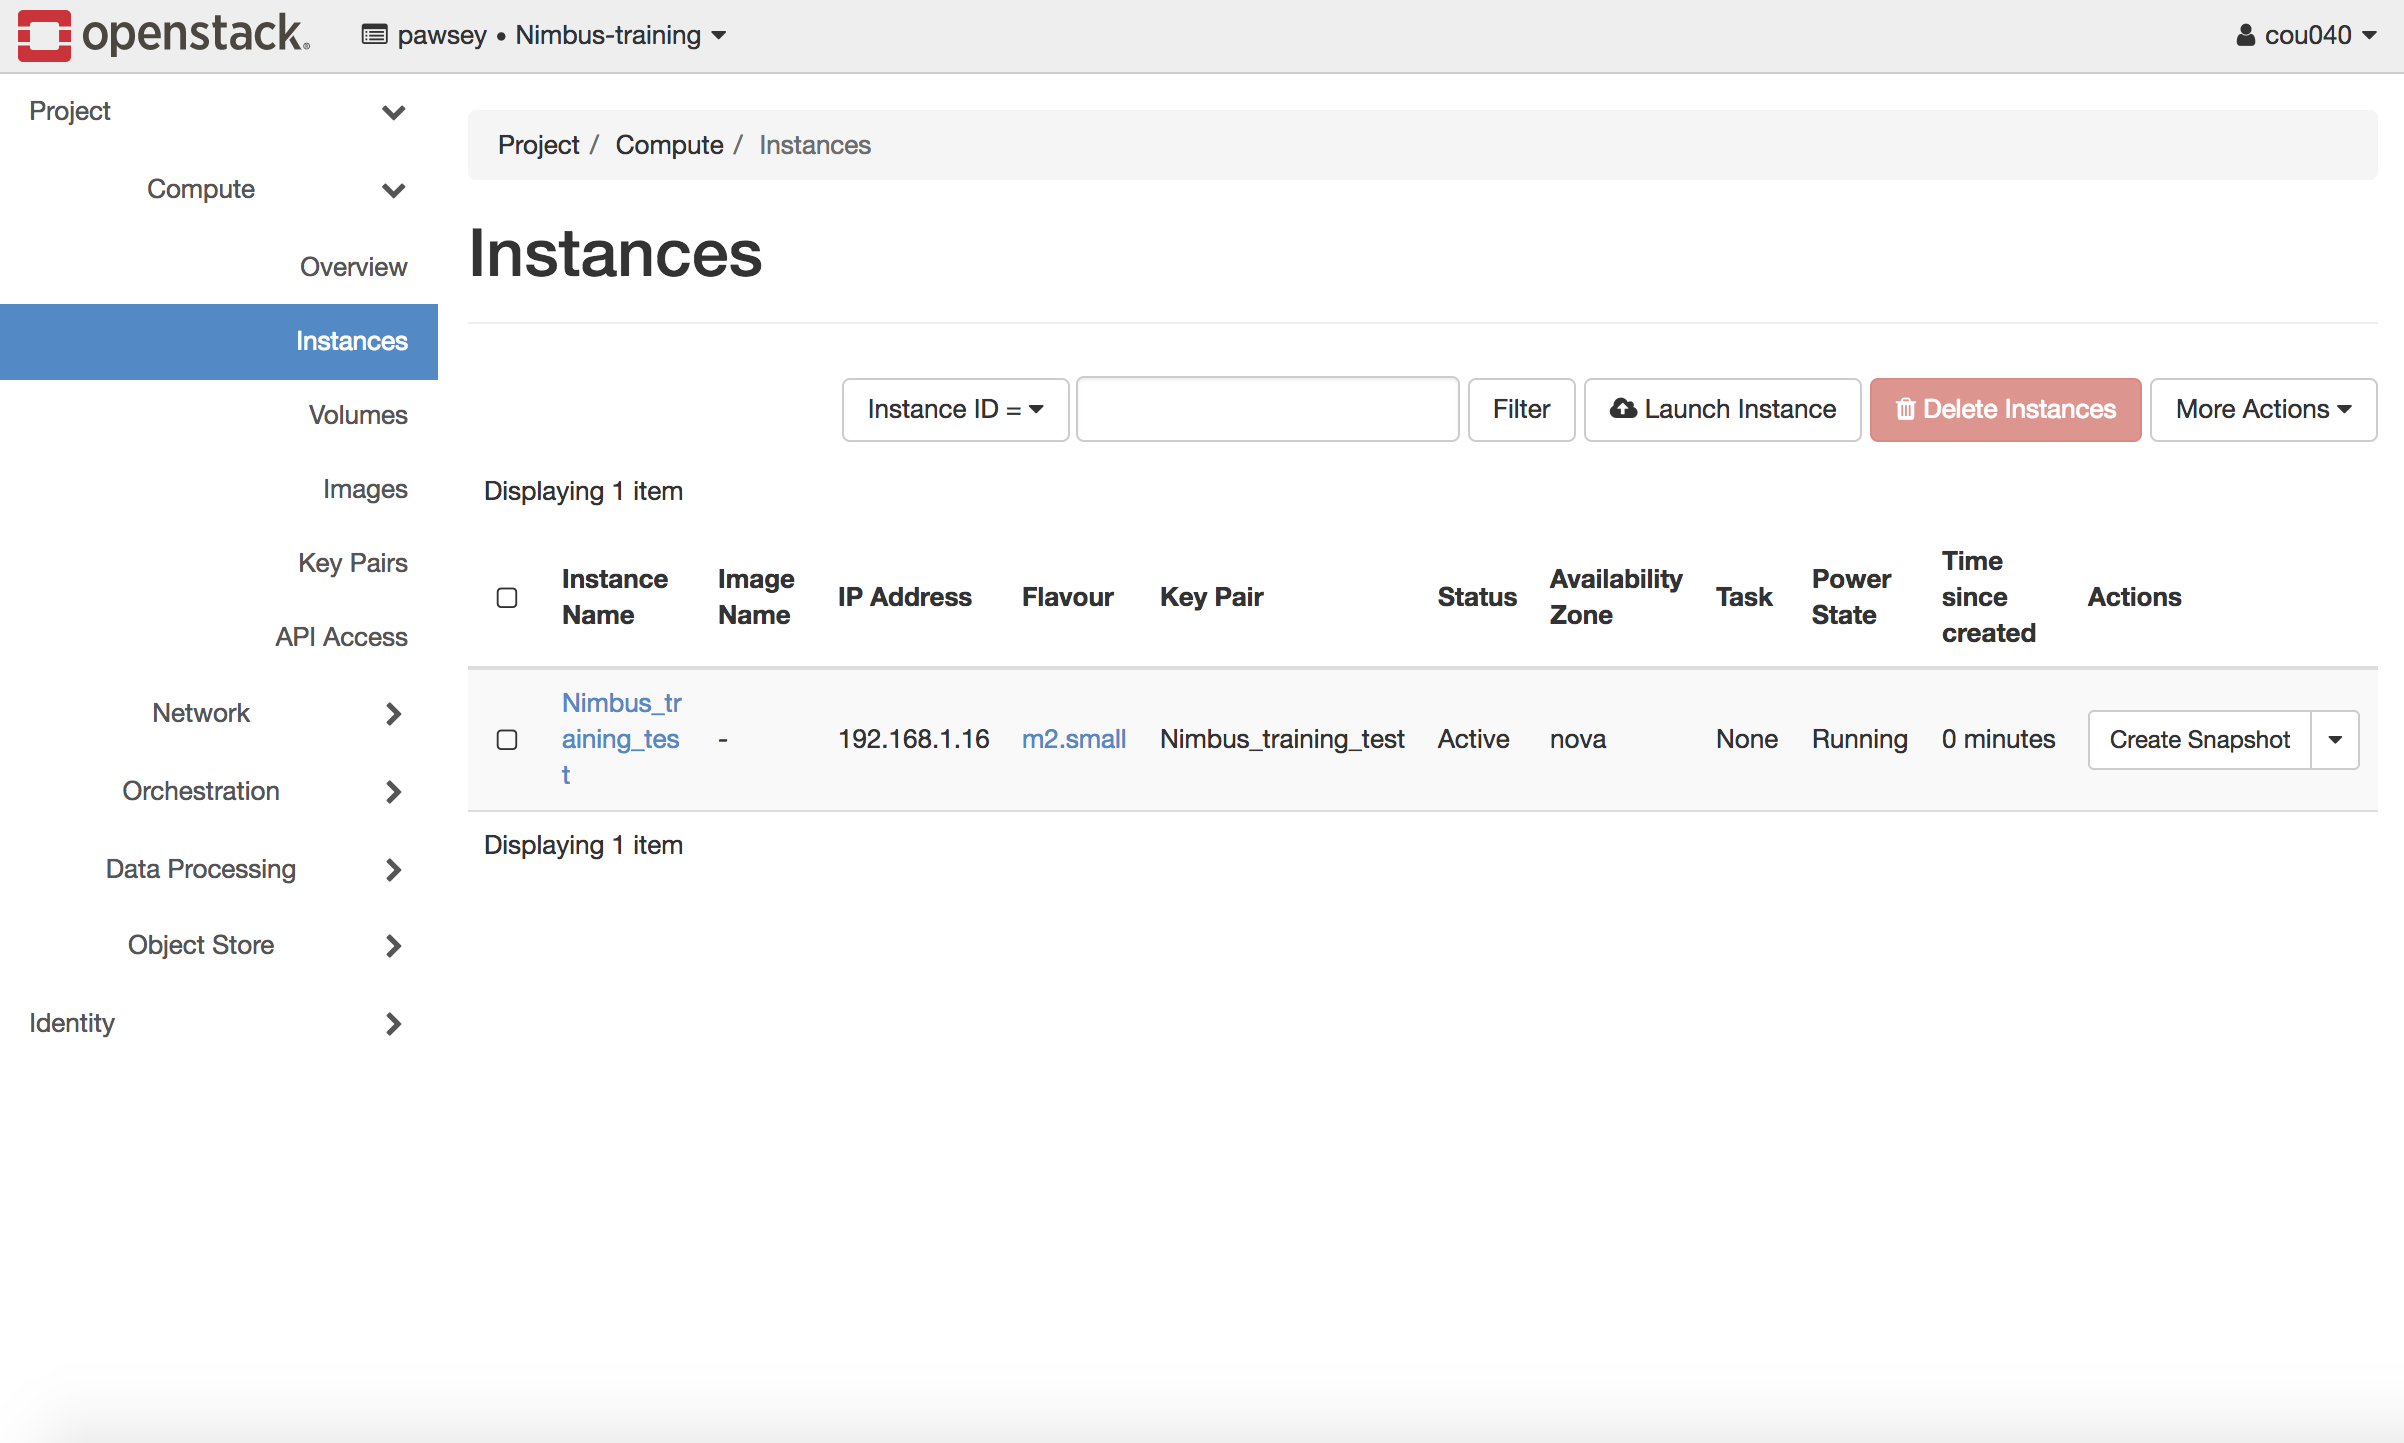 Launch Instance Done